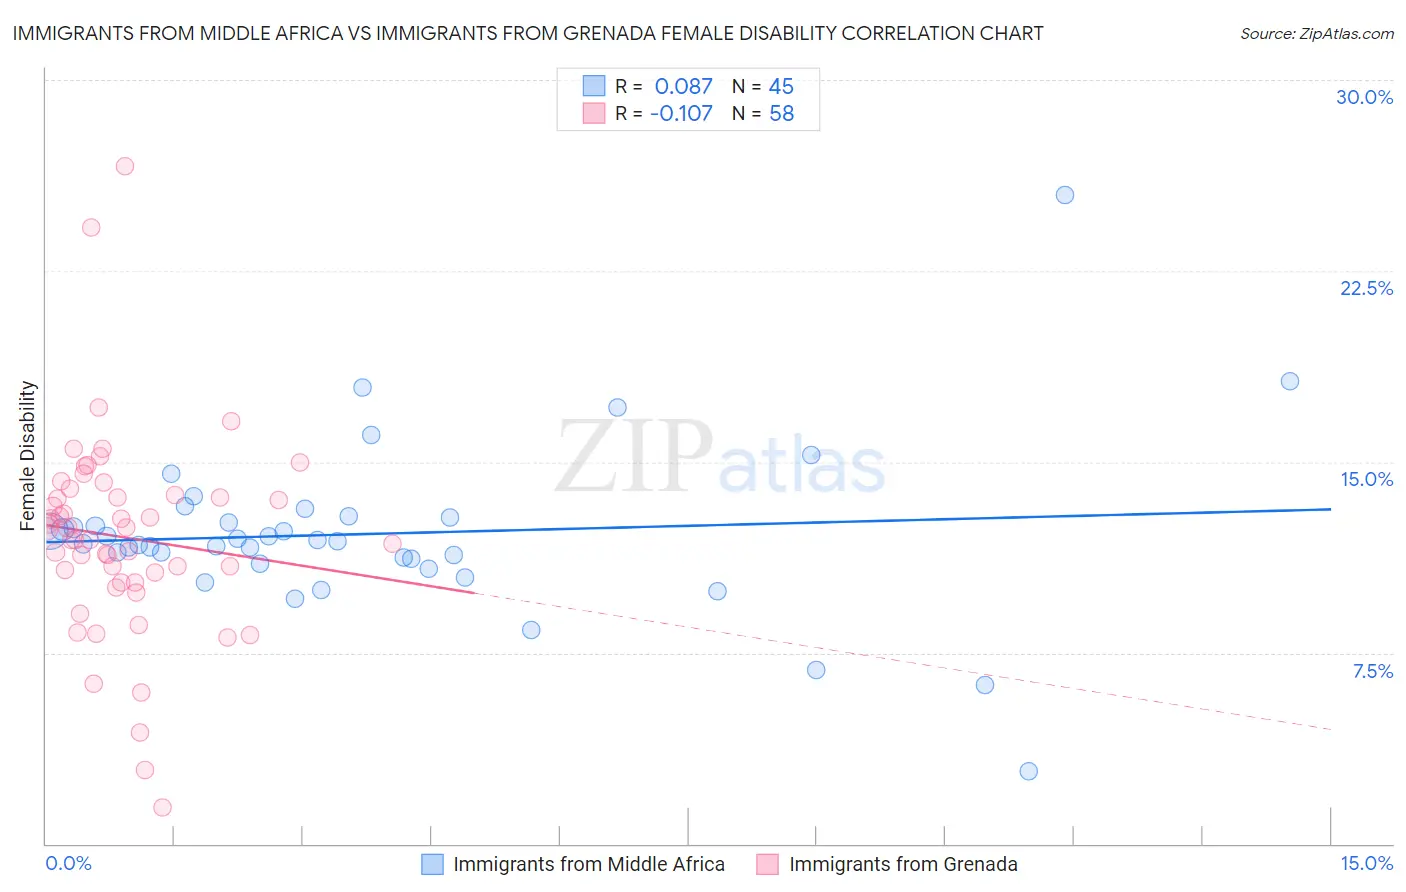 Immigrants from Middle Africa vs Immigrants from Grenada Female Disability